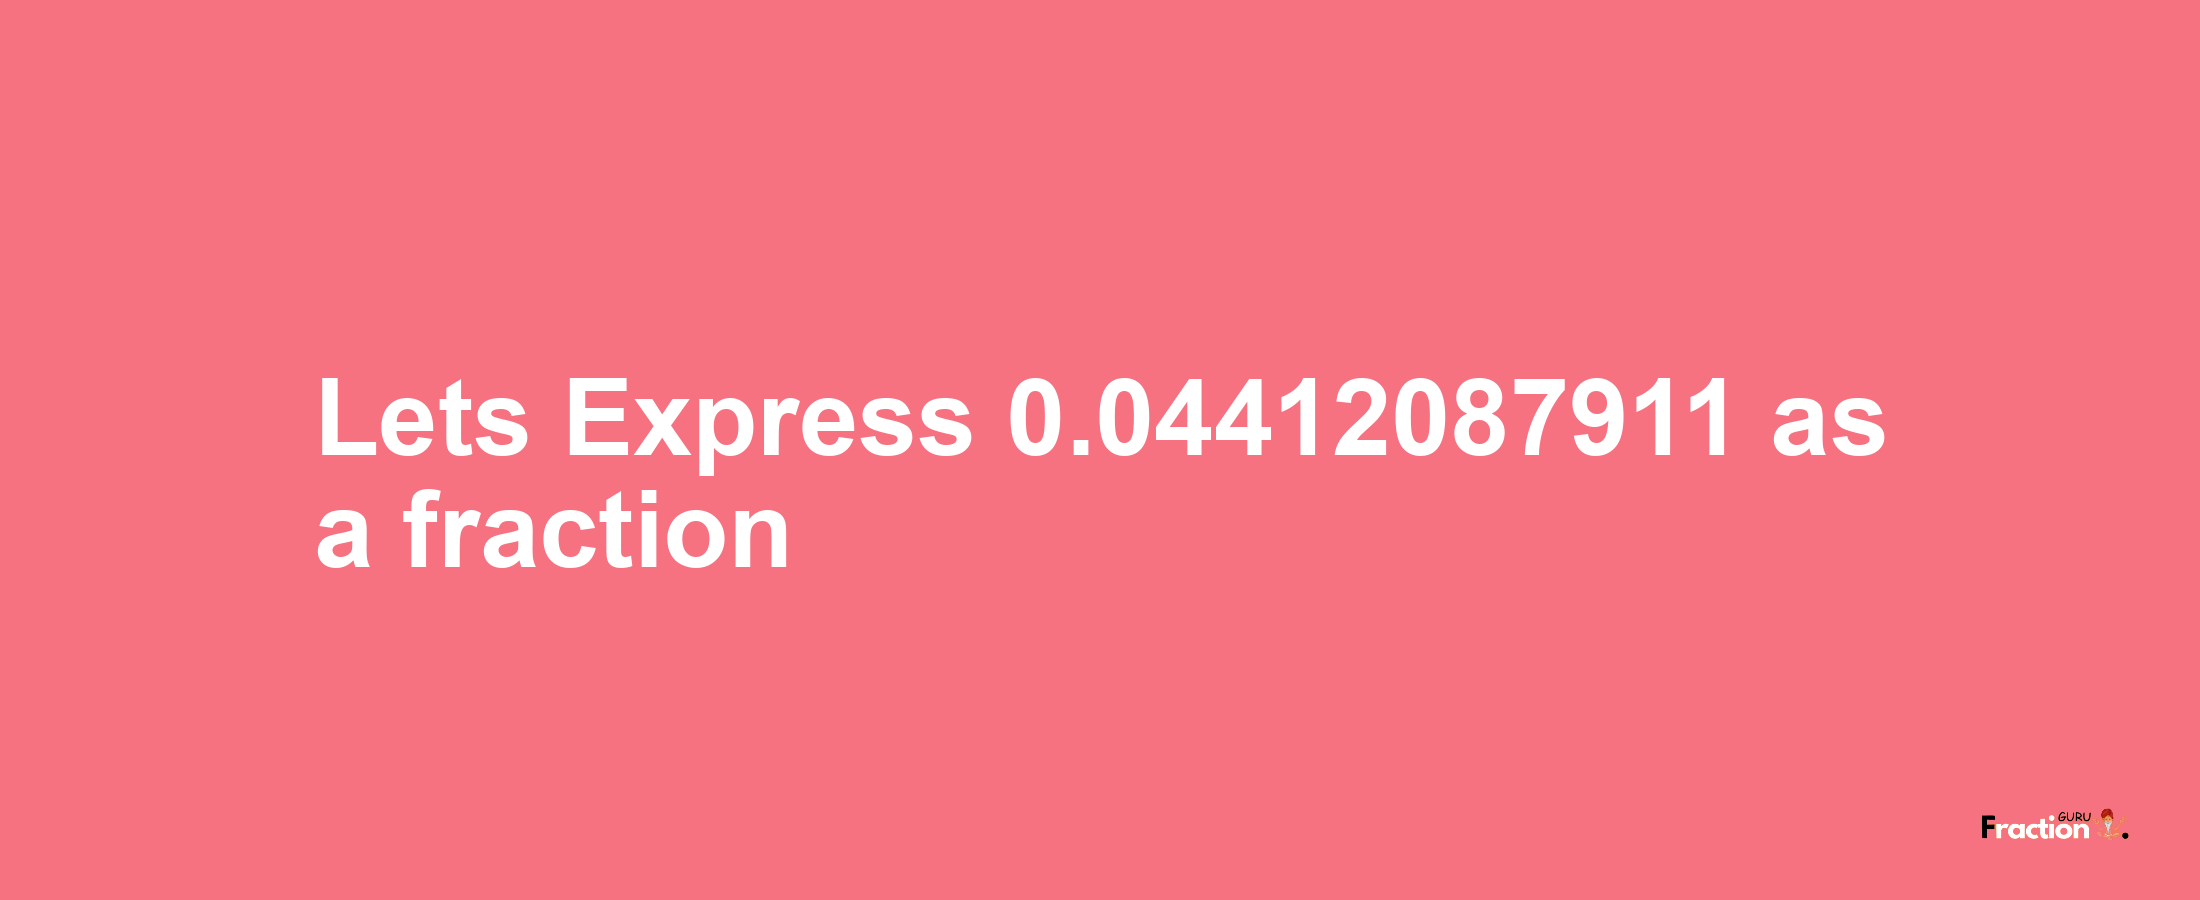 Lets Express 0.04412087911 as afraction